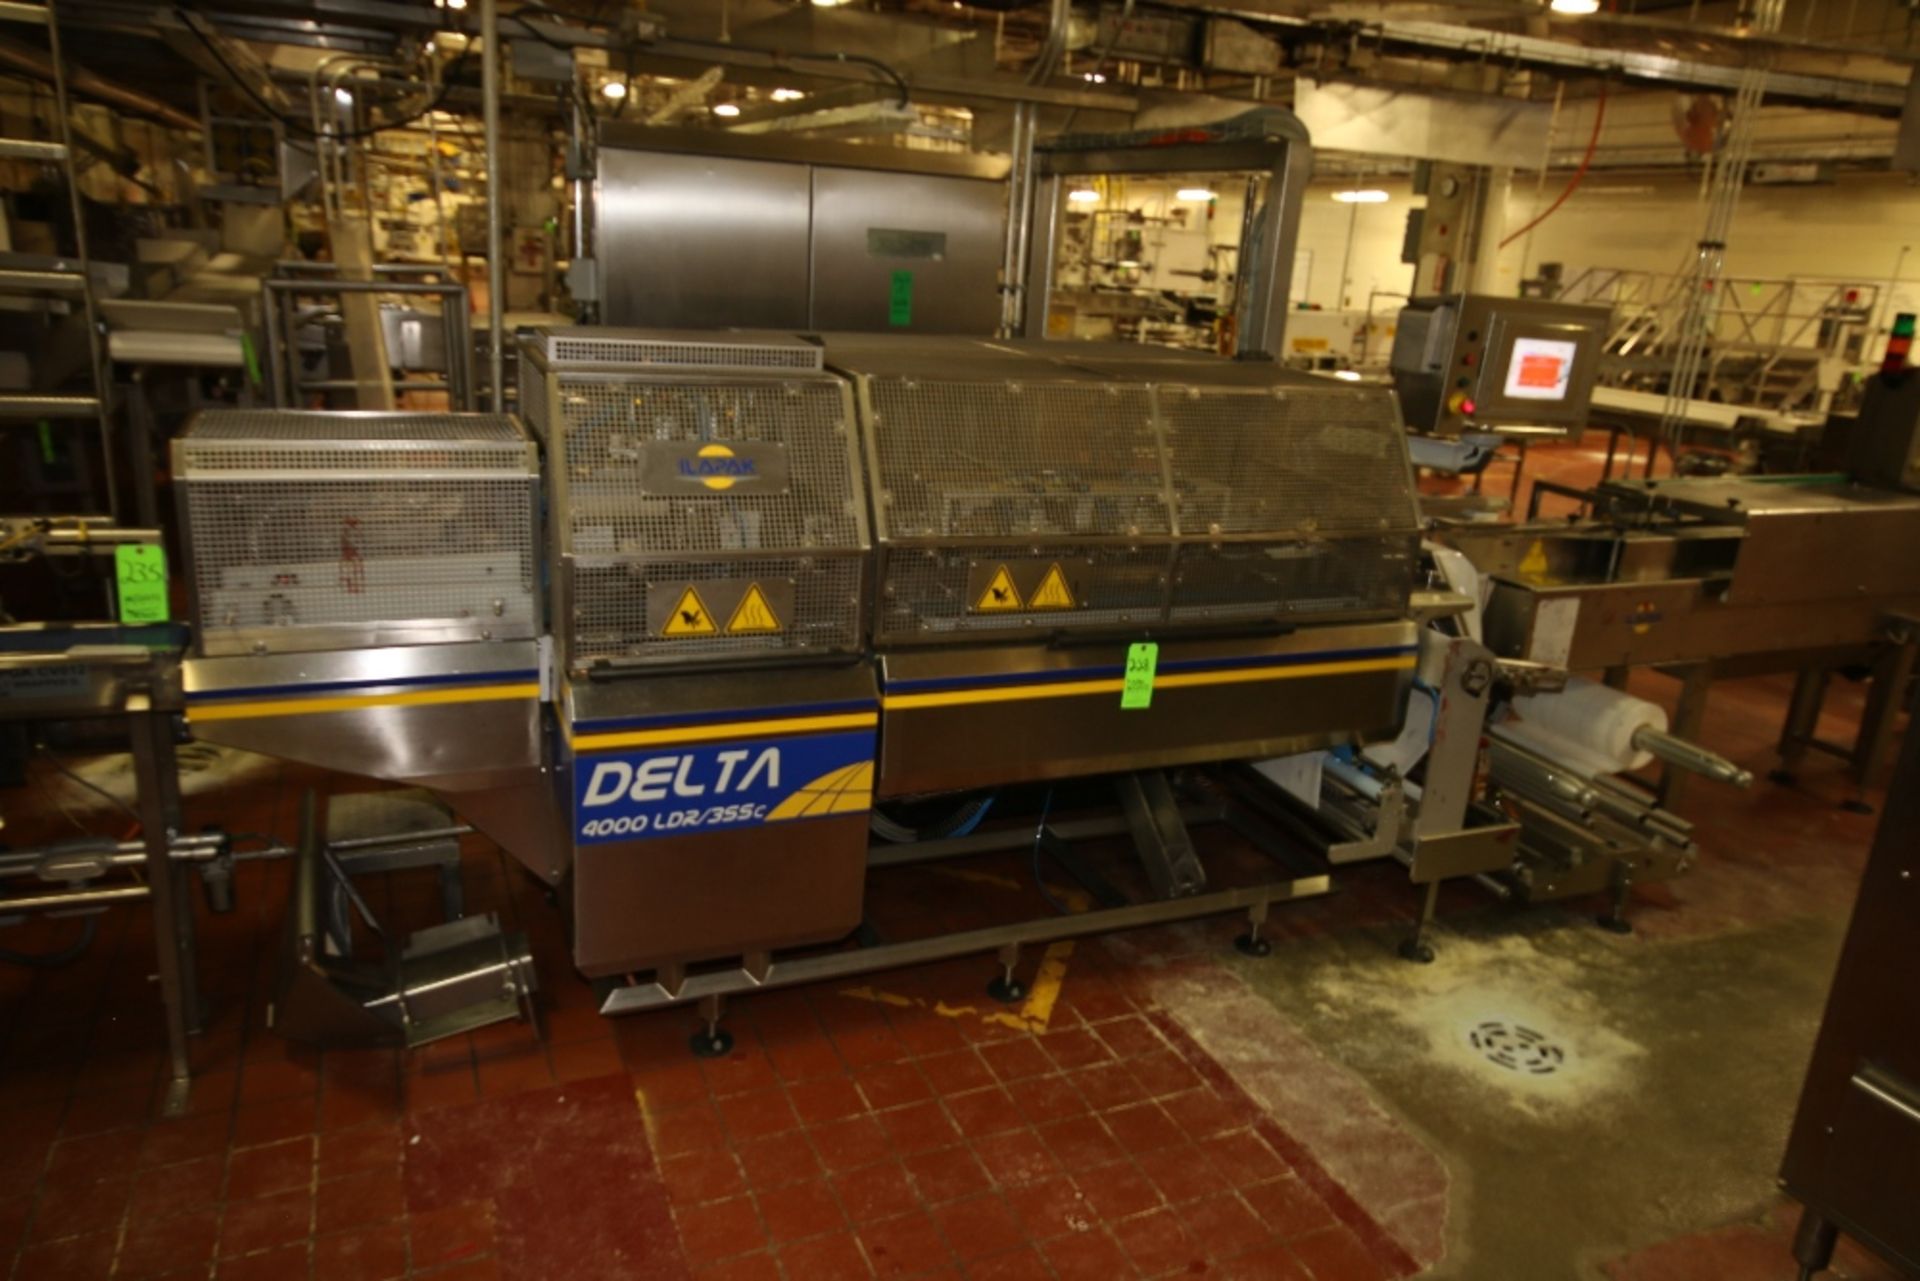 2014 Ilapak Delta 4000 LDR/3SSc Horizontal Flow Wrapper, S/N 640290008, with Walking Beam Long Dwell - Image 2 of 15